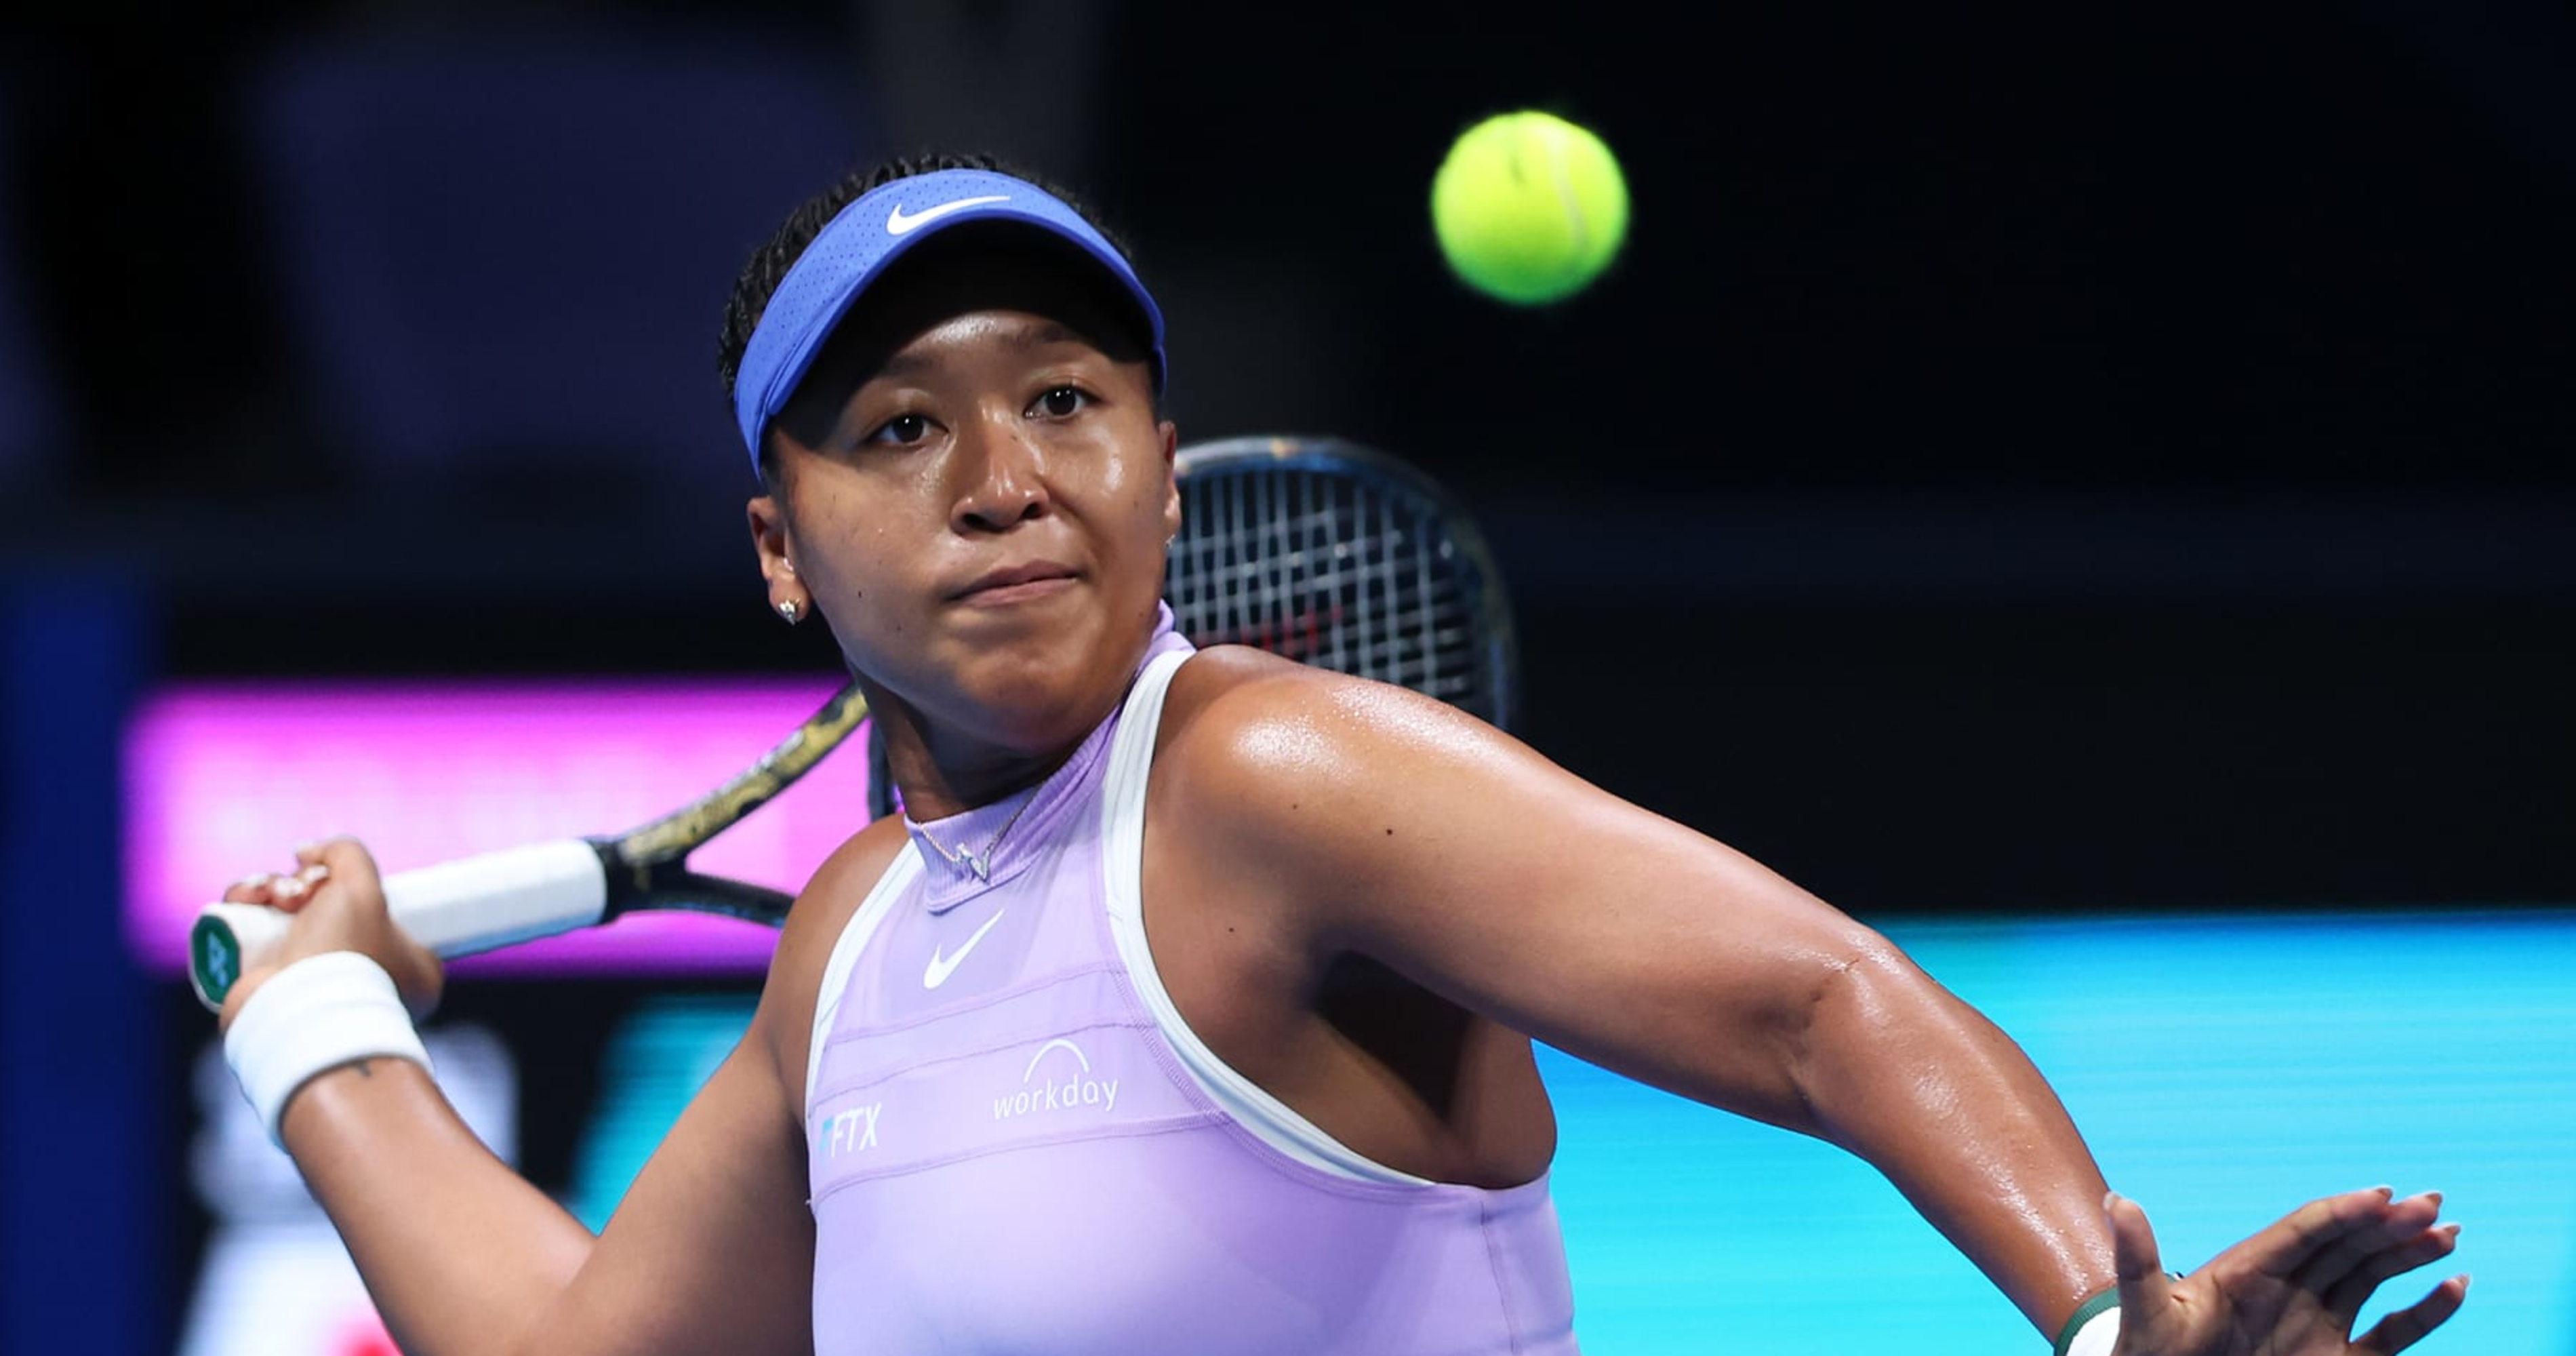 Naomi Osaka Announces She's Pregnant with 1st Child, Will Return to